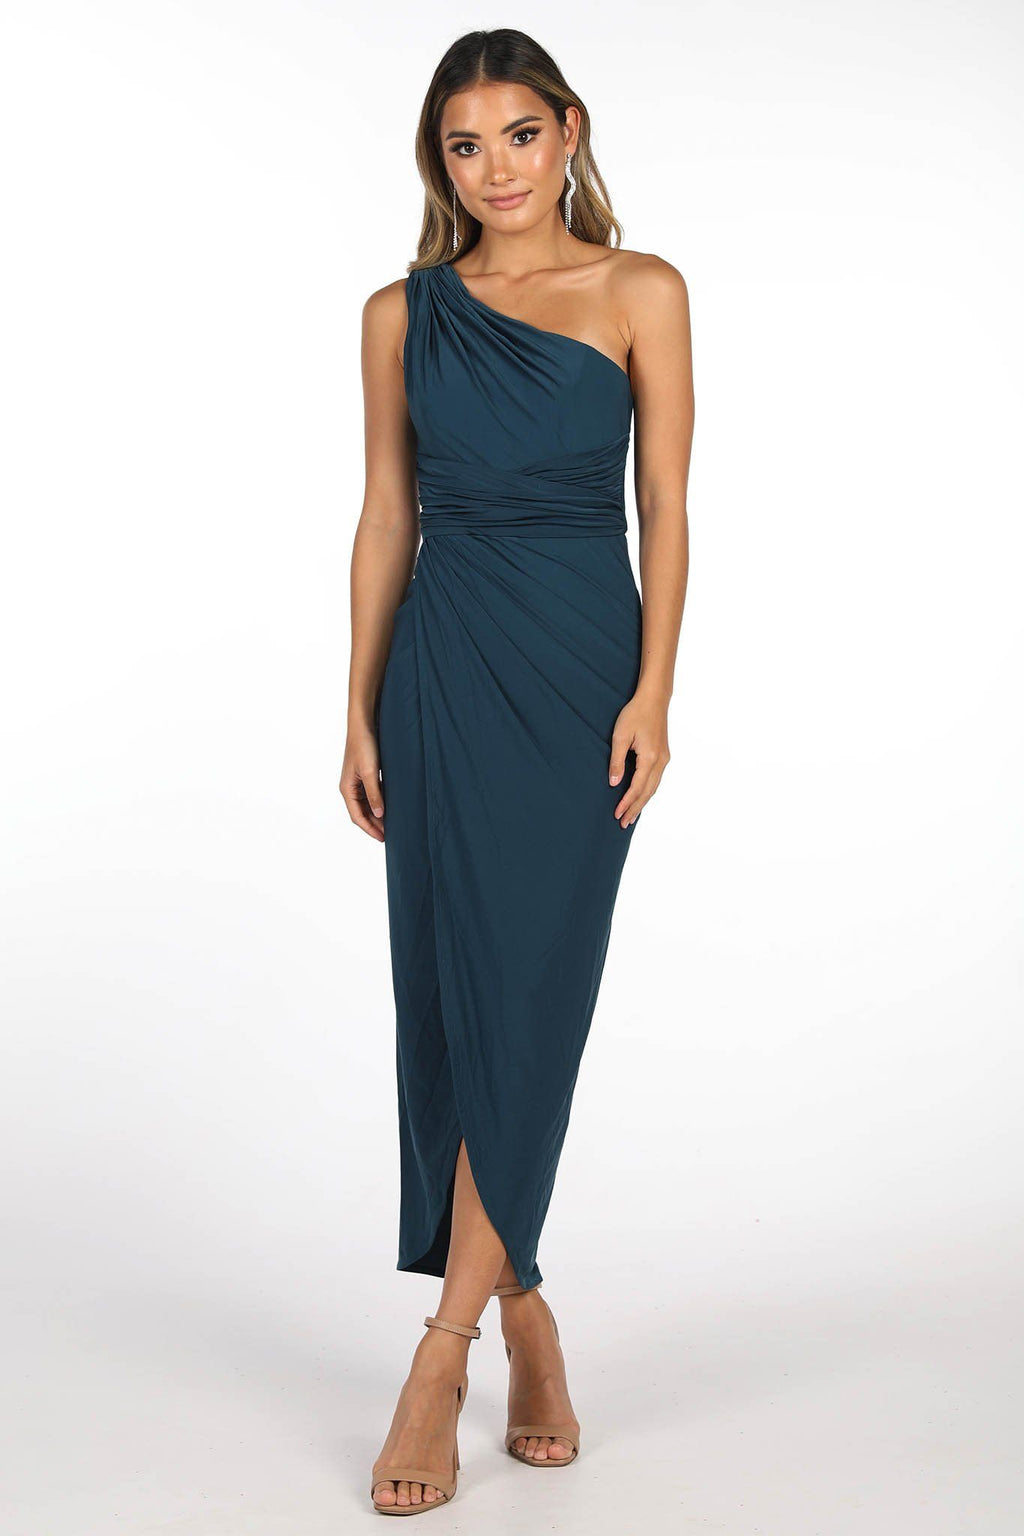 Deep Teal Green Midi Dress with One Shoulder Neckline, Faux-wrap Front Design and Asymmetrical Skirt with Centre Front Split